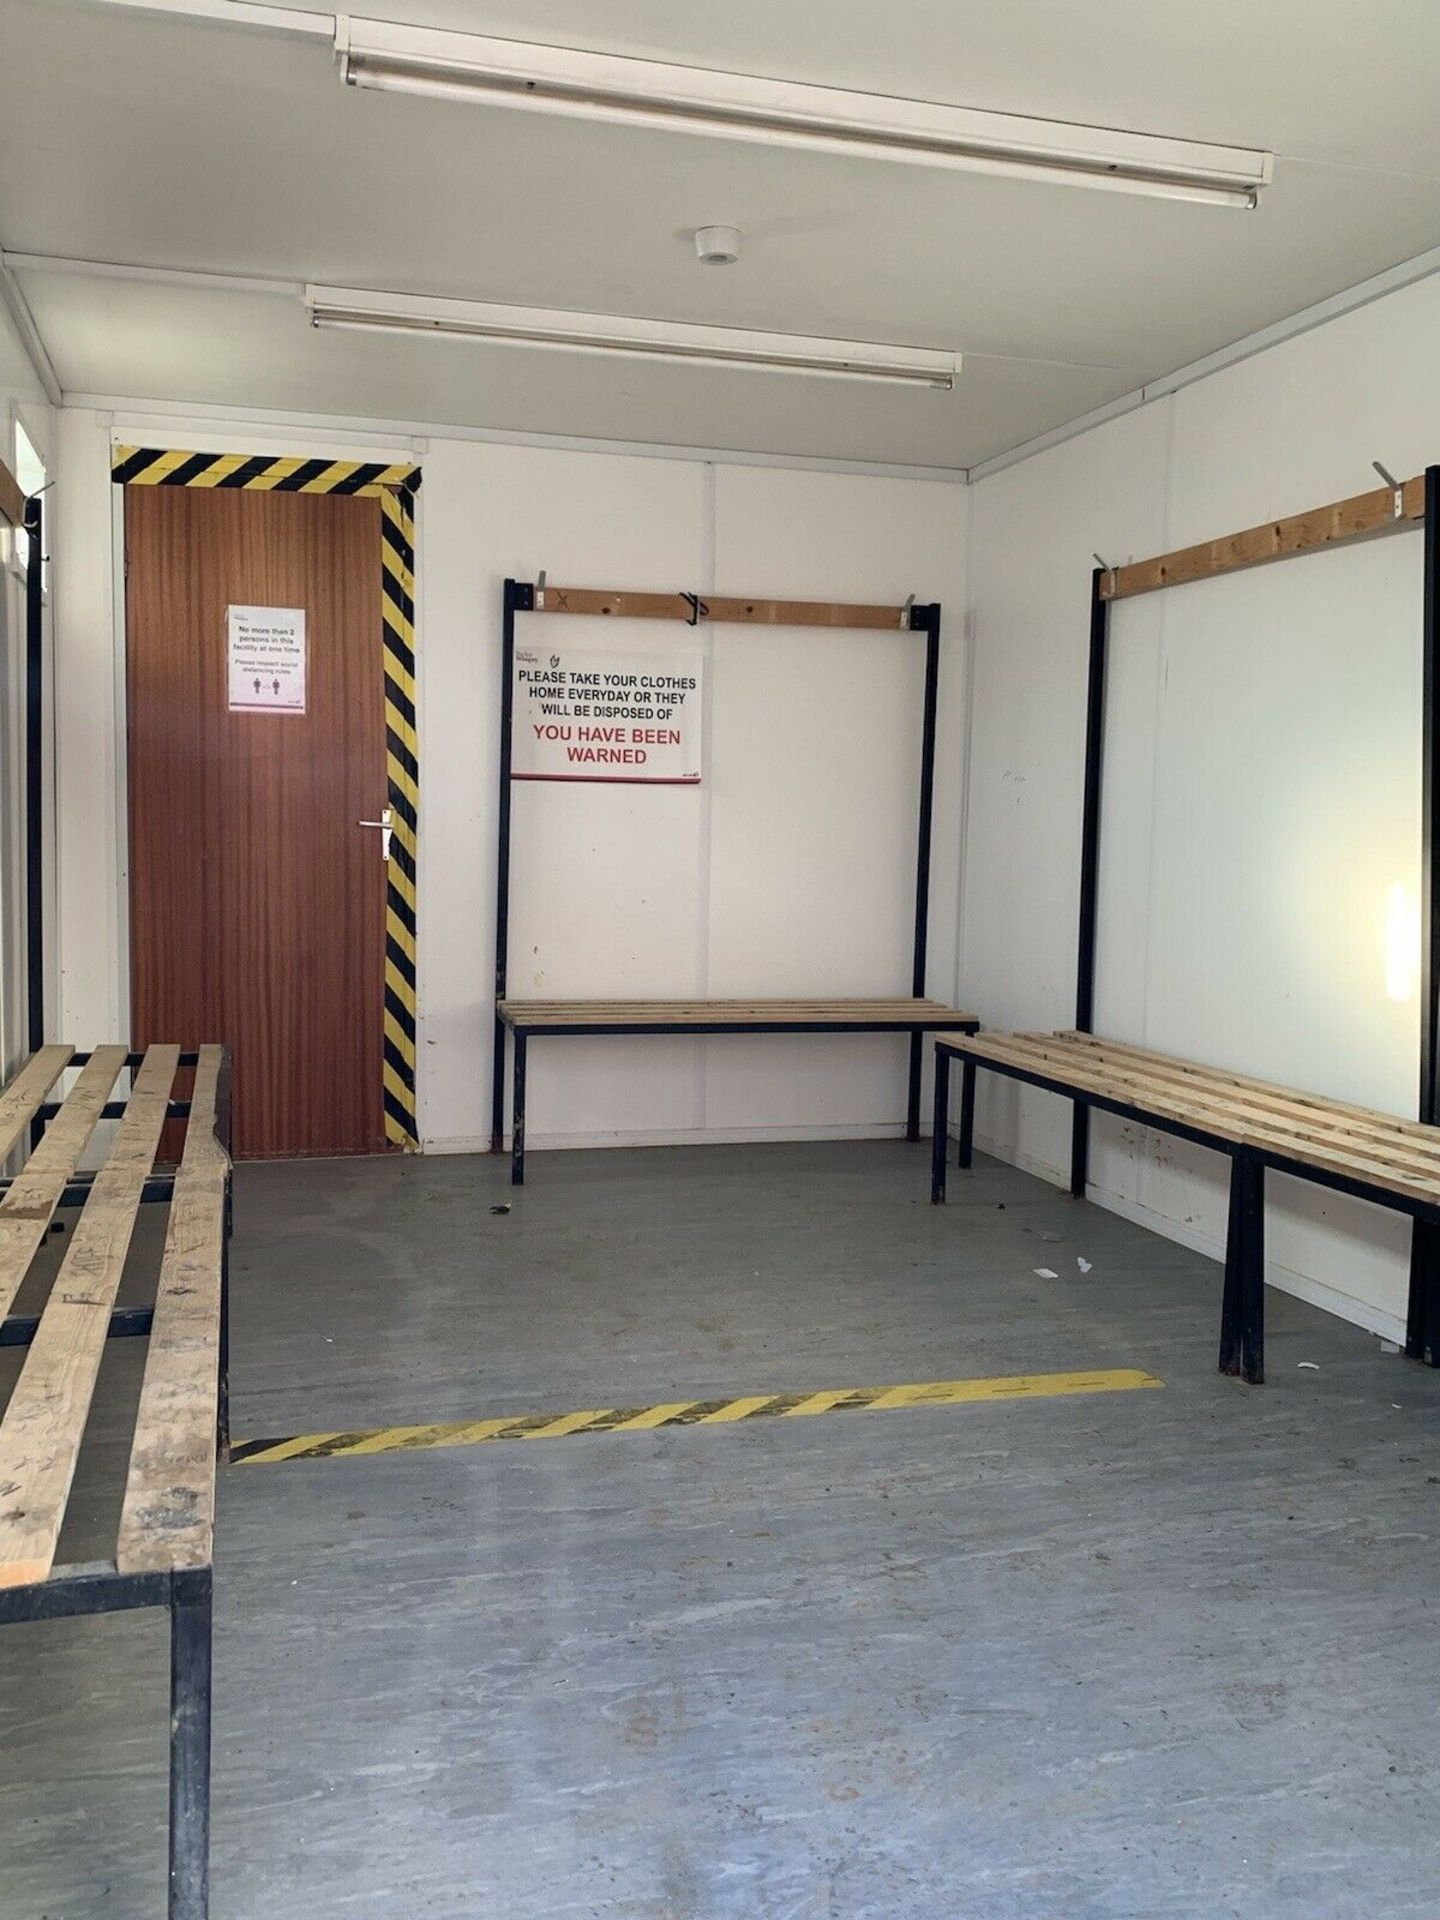 Portable Toilet Block With Shower Drying Room Site - Image 10 of 11